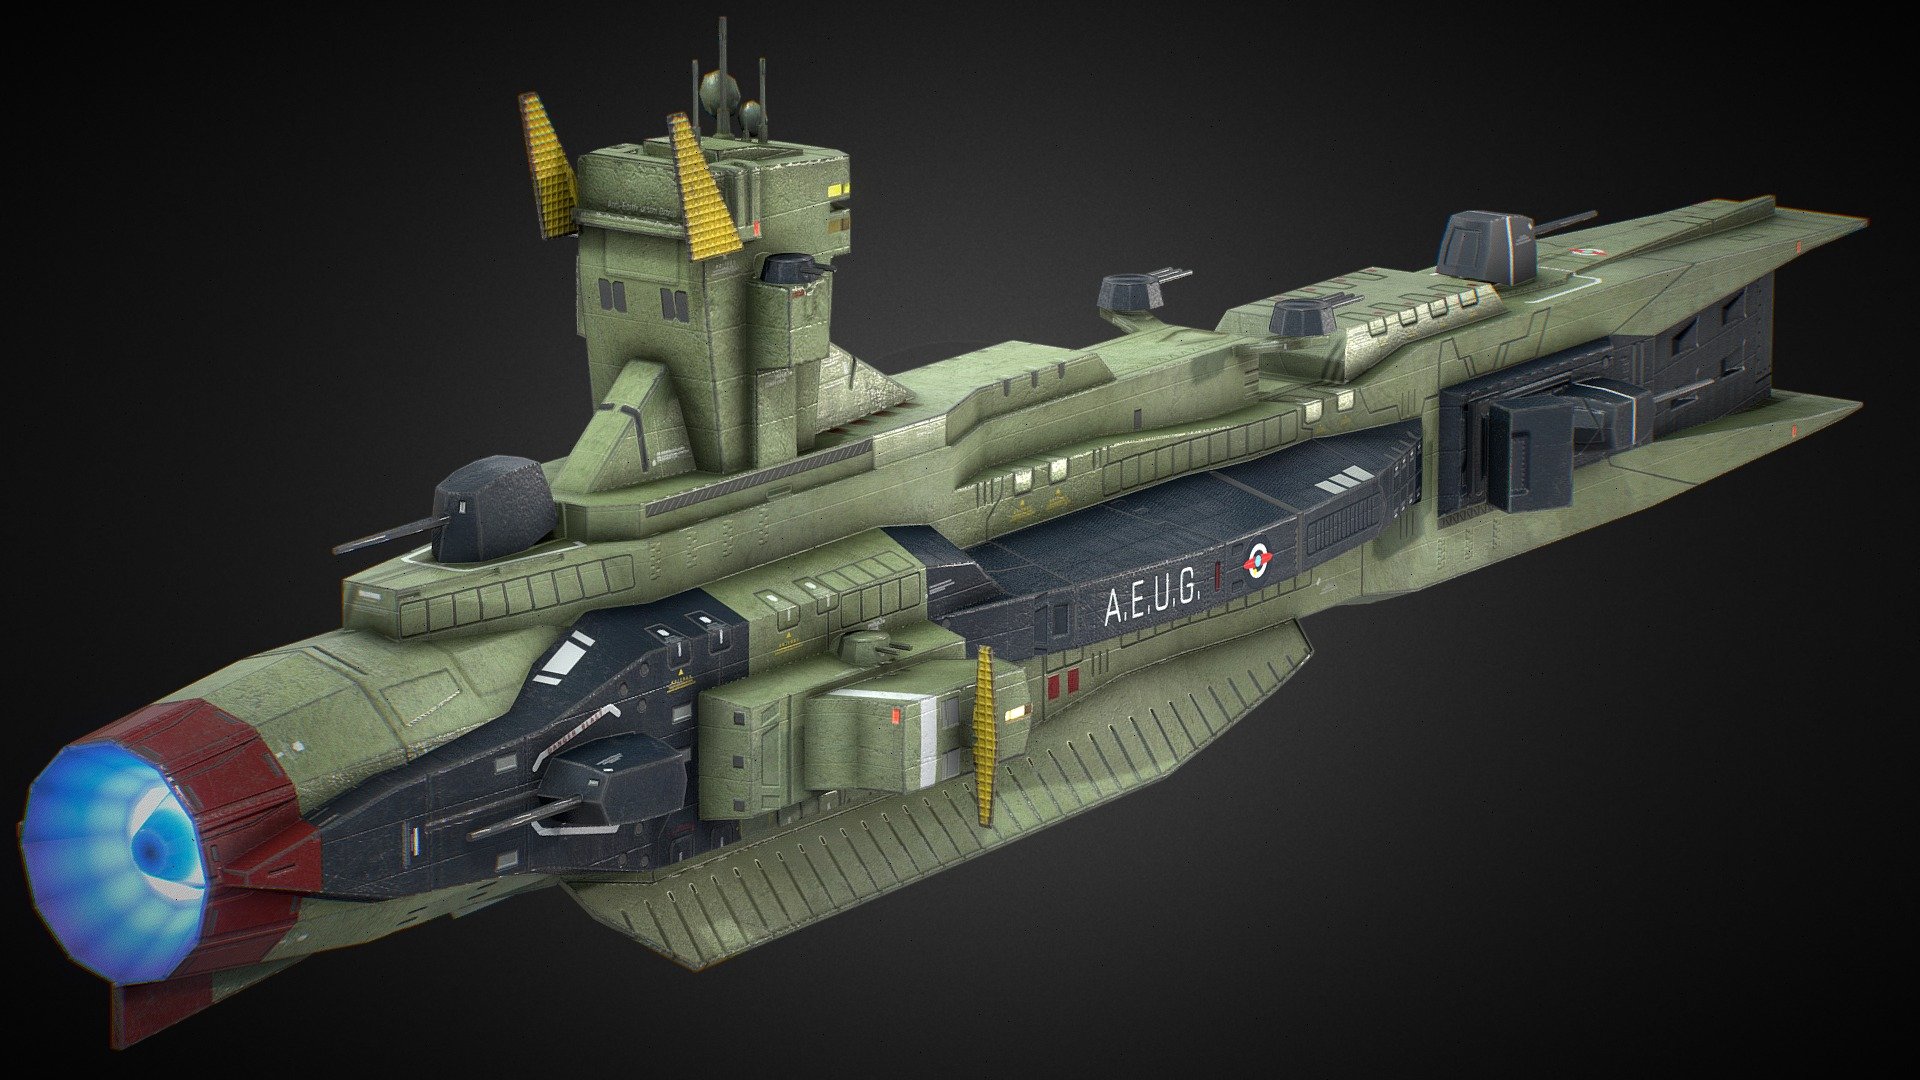 EFF Salamis Class Space Cruiser AEUG Colour
This model was made for One Year War mod of Hearts of Iron IV.
Our Mod Steam Home Page
https://steamcommunity.com/sharedfiles/filedetails/?id=2064985570 - EFF Salamis Class SpaceCruiser AEUG - 3D model by One Year War Mod (@hoi4oneyearwar) 3d model